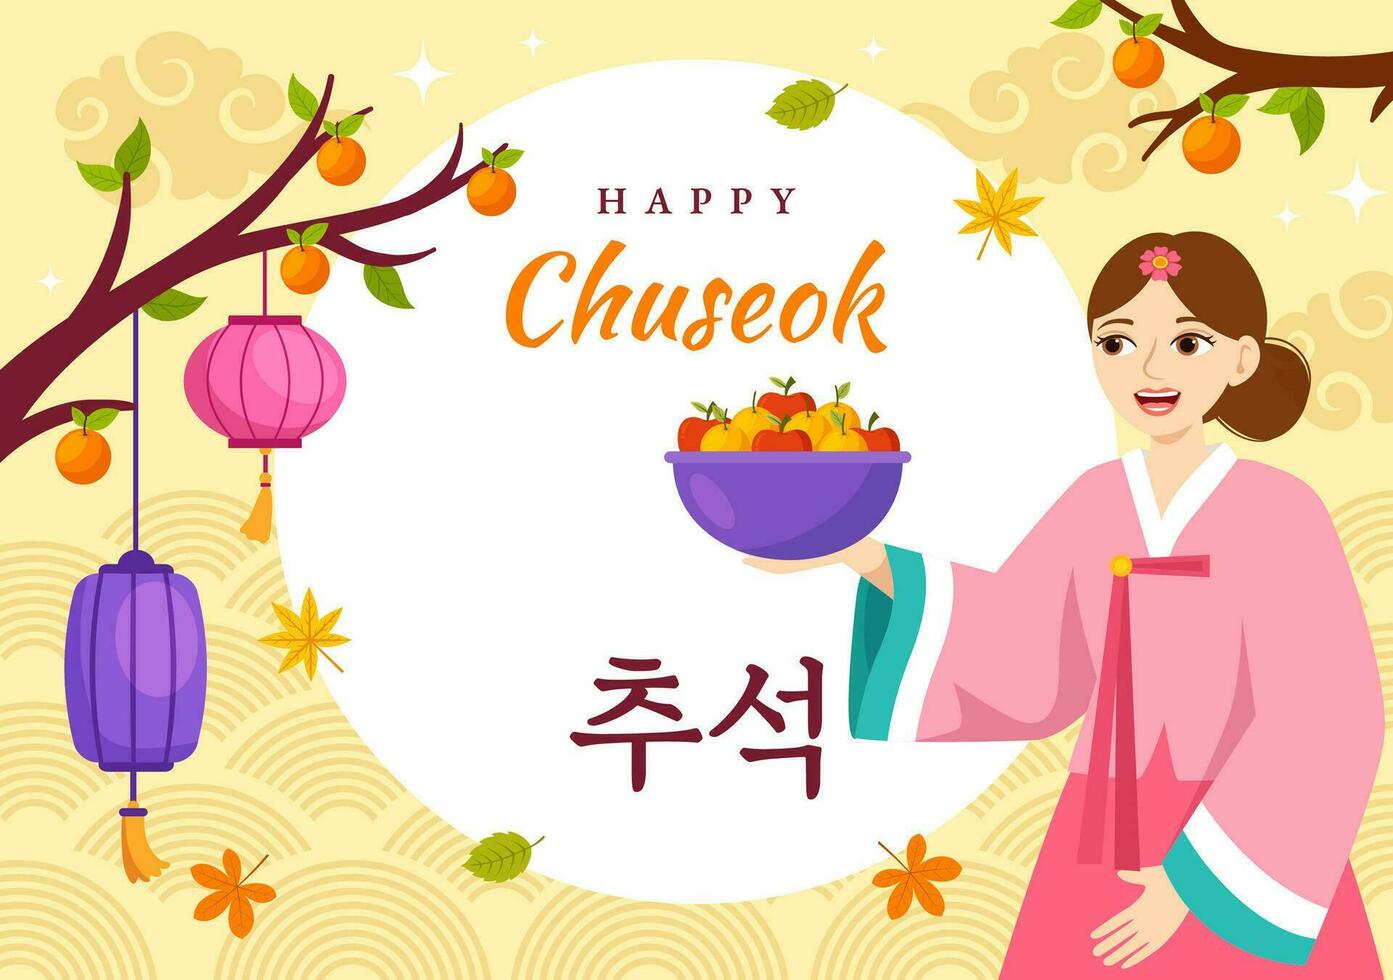 Happy Chuseok Day Vector Illustration of Korean Thanksgiving Event with Harvest Festival Celebrate on Autumn Night Background Hand Drawn Templates